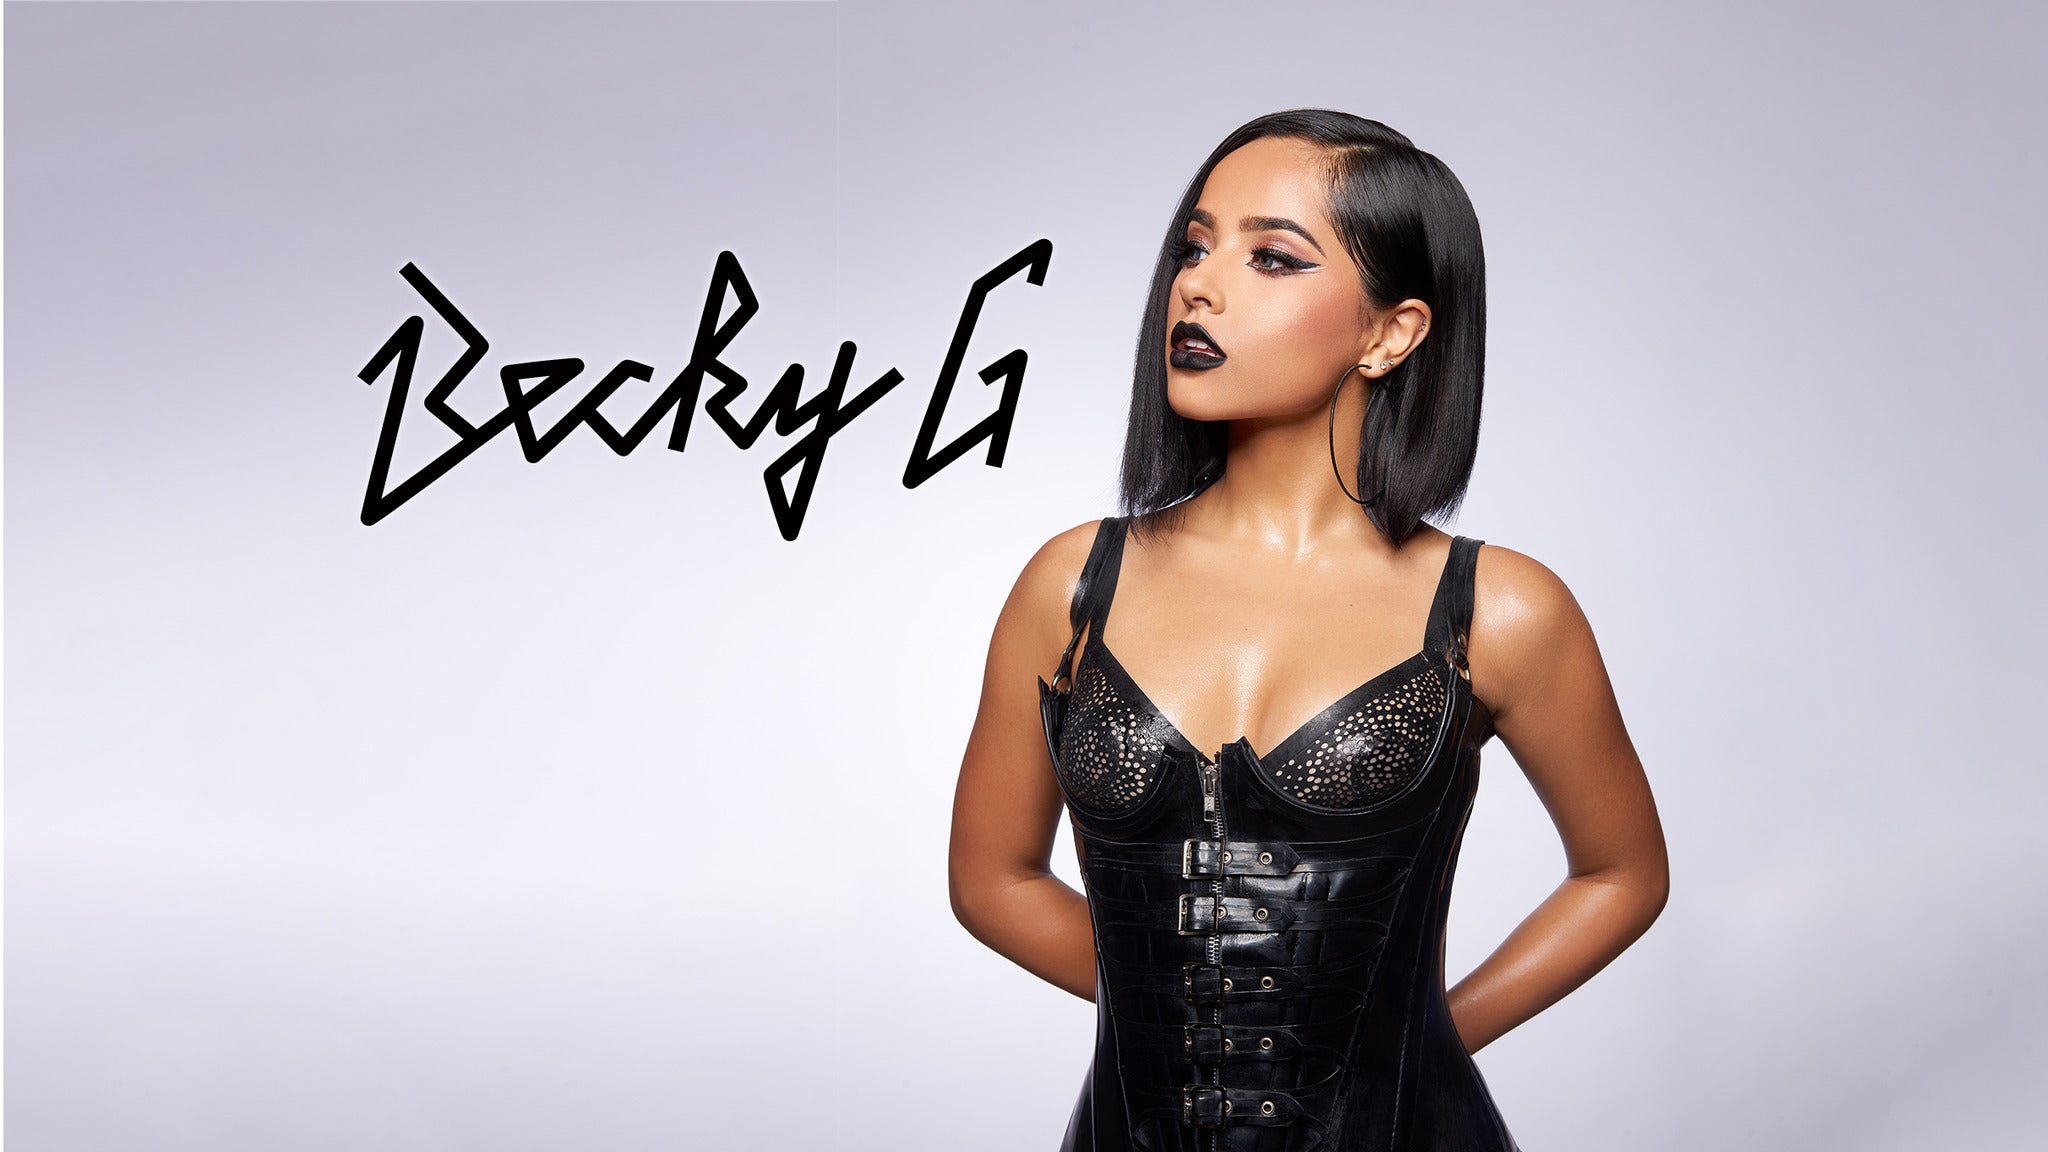 Becky G at Dos Equis Pavilion on Aug 04, 2022 tickets Eventsfy